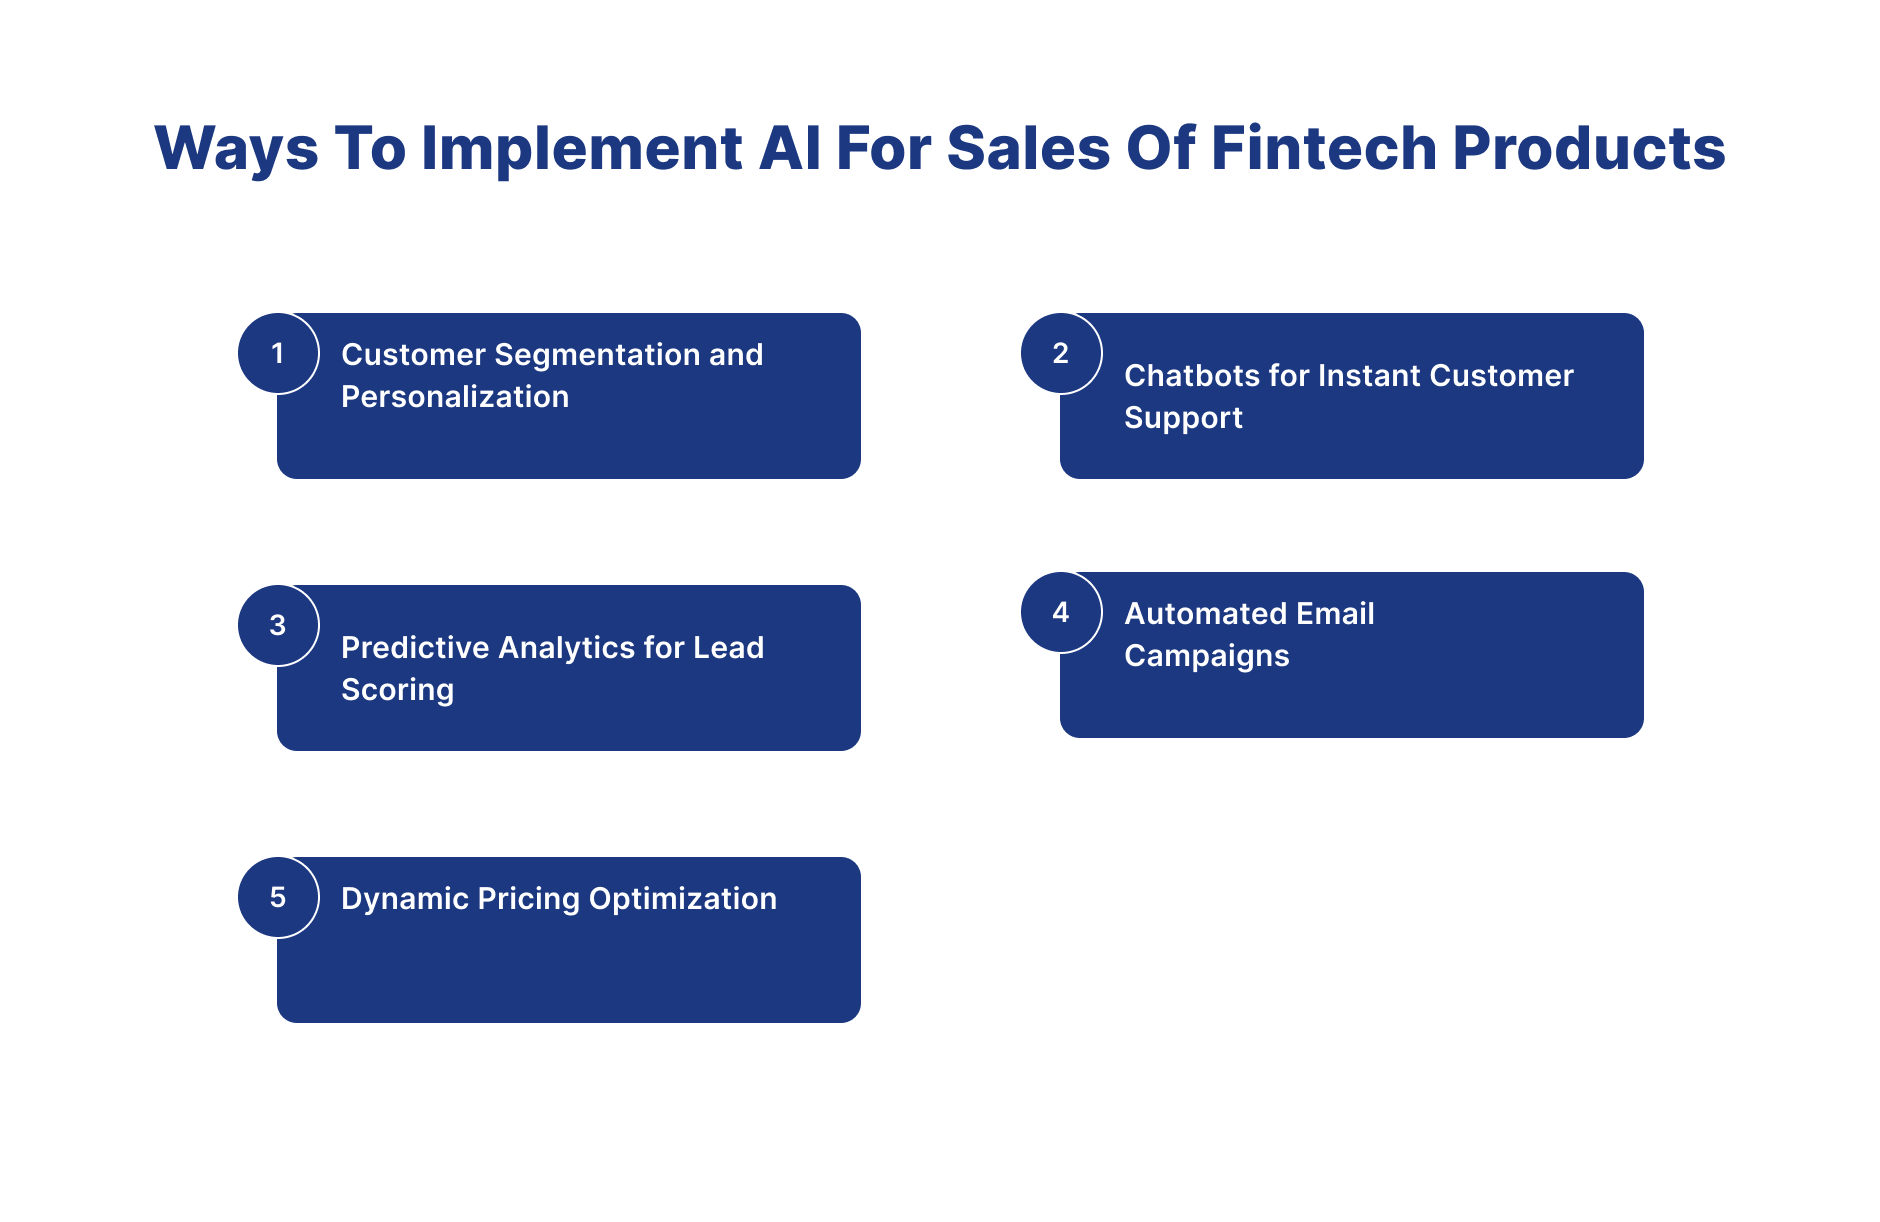 AI for sales of fintech products